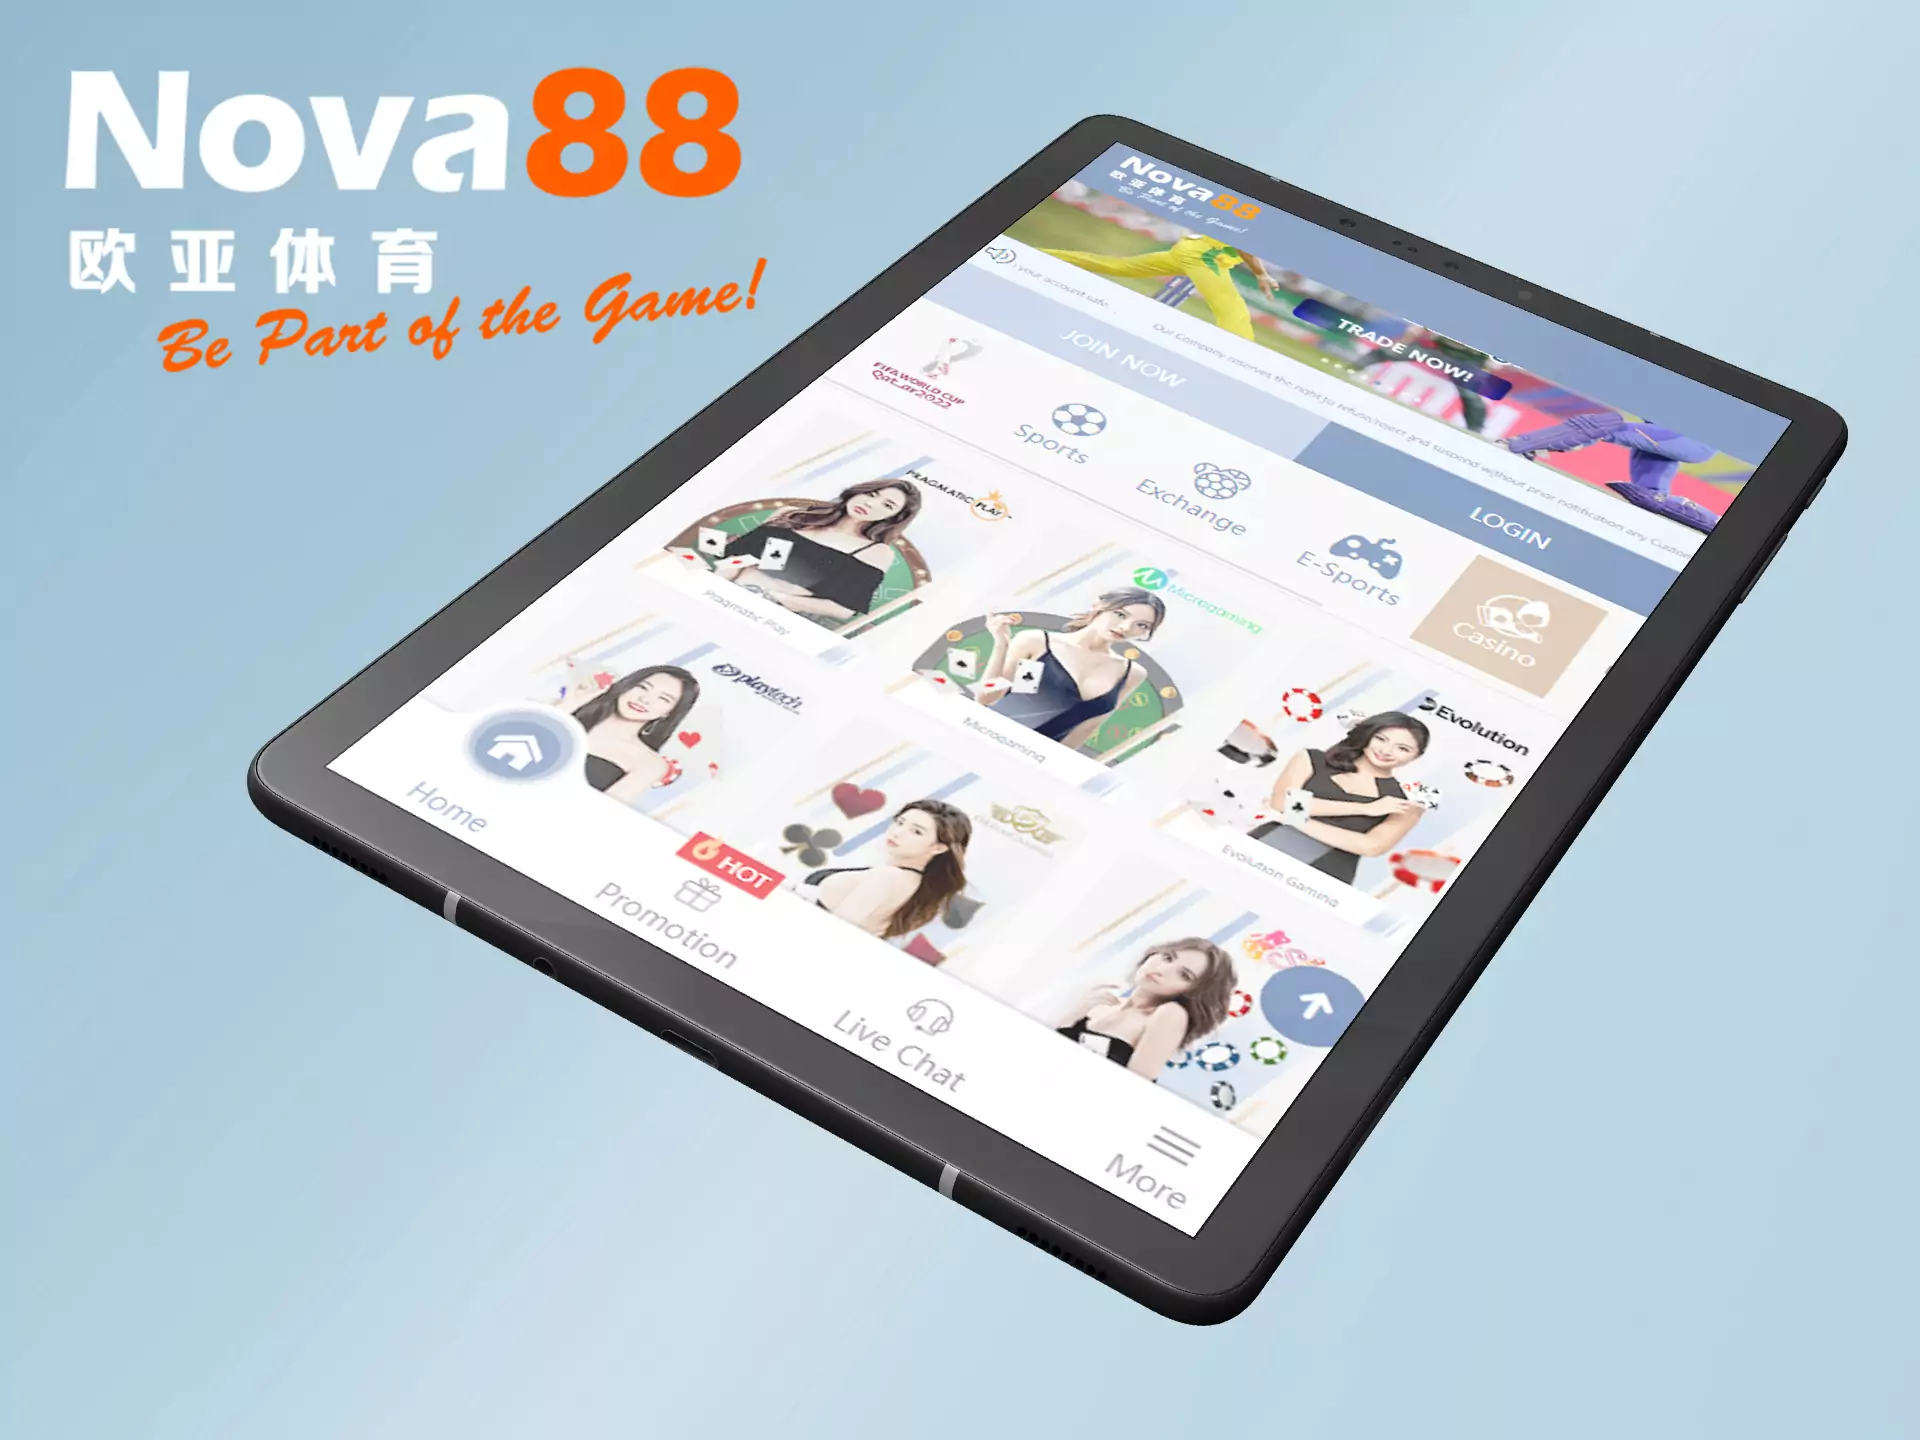 You can play Nova88 casino games on any device.